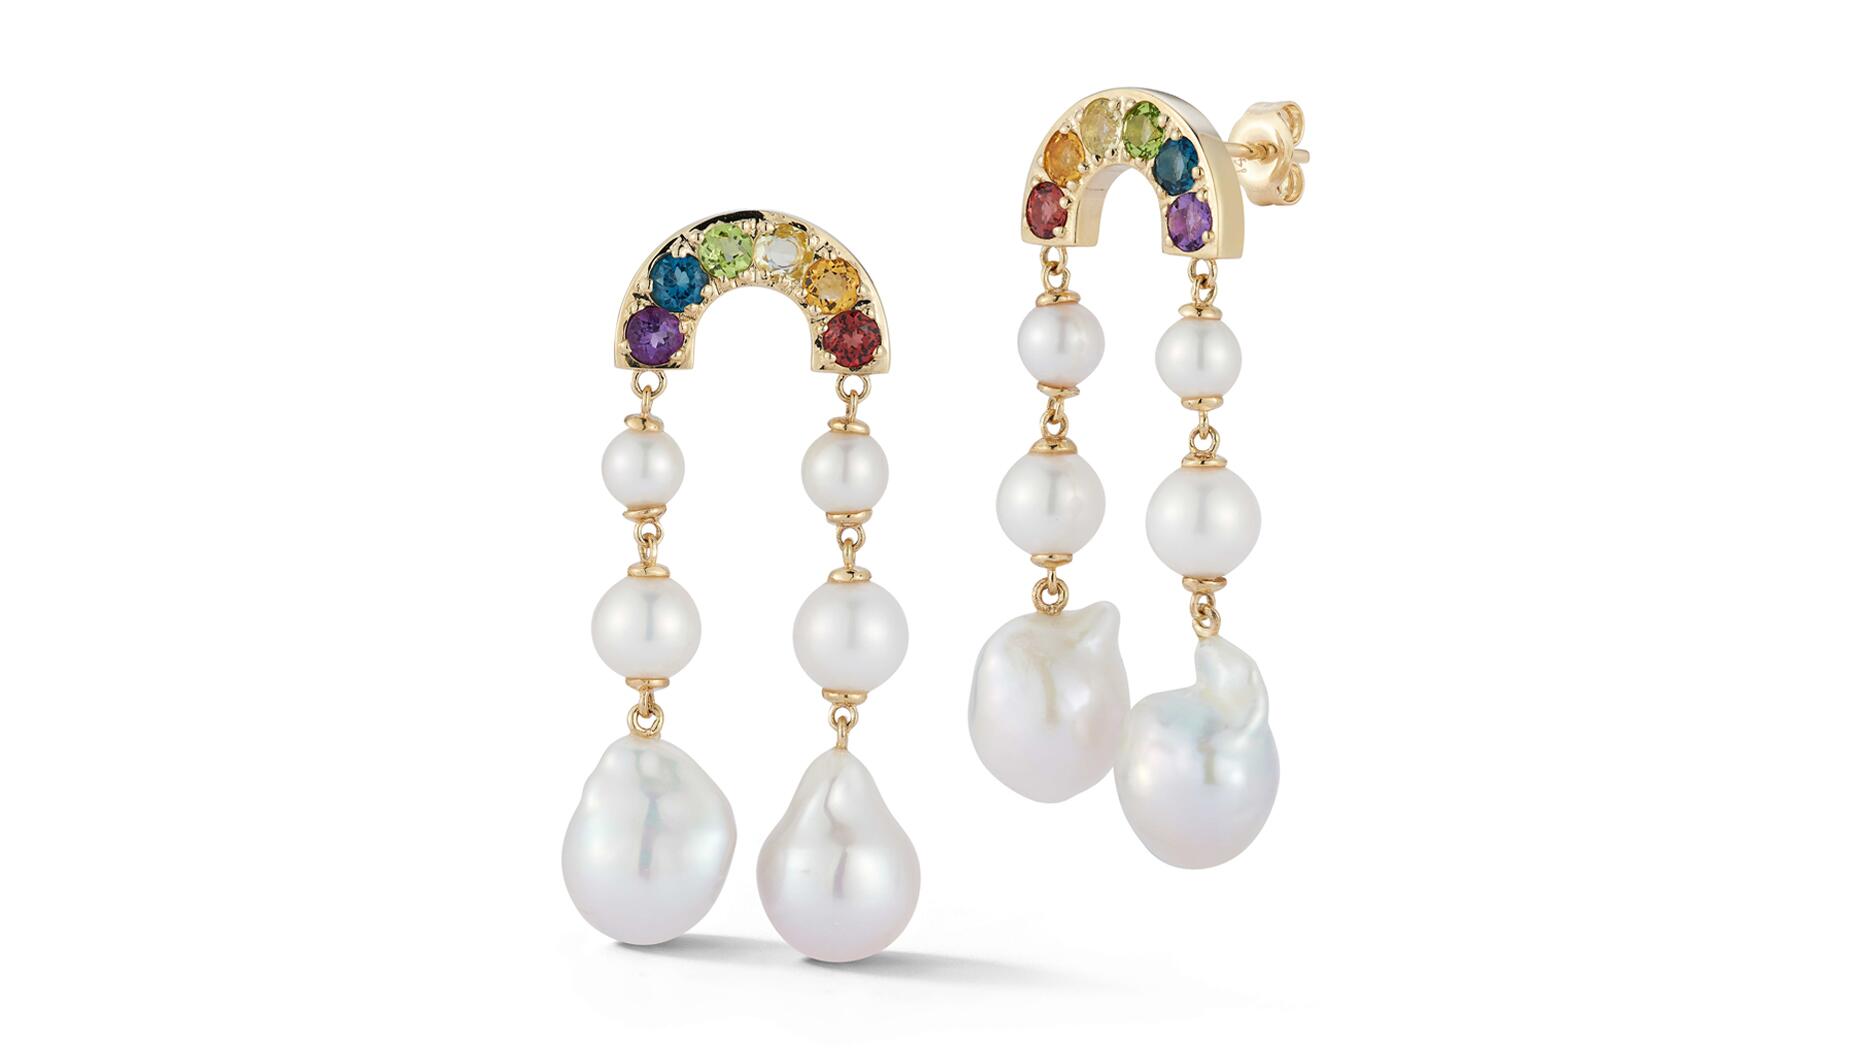 Piece of the Week: Mateo 'After the Storm' Earrings